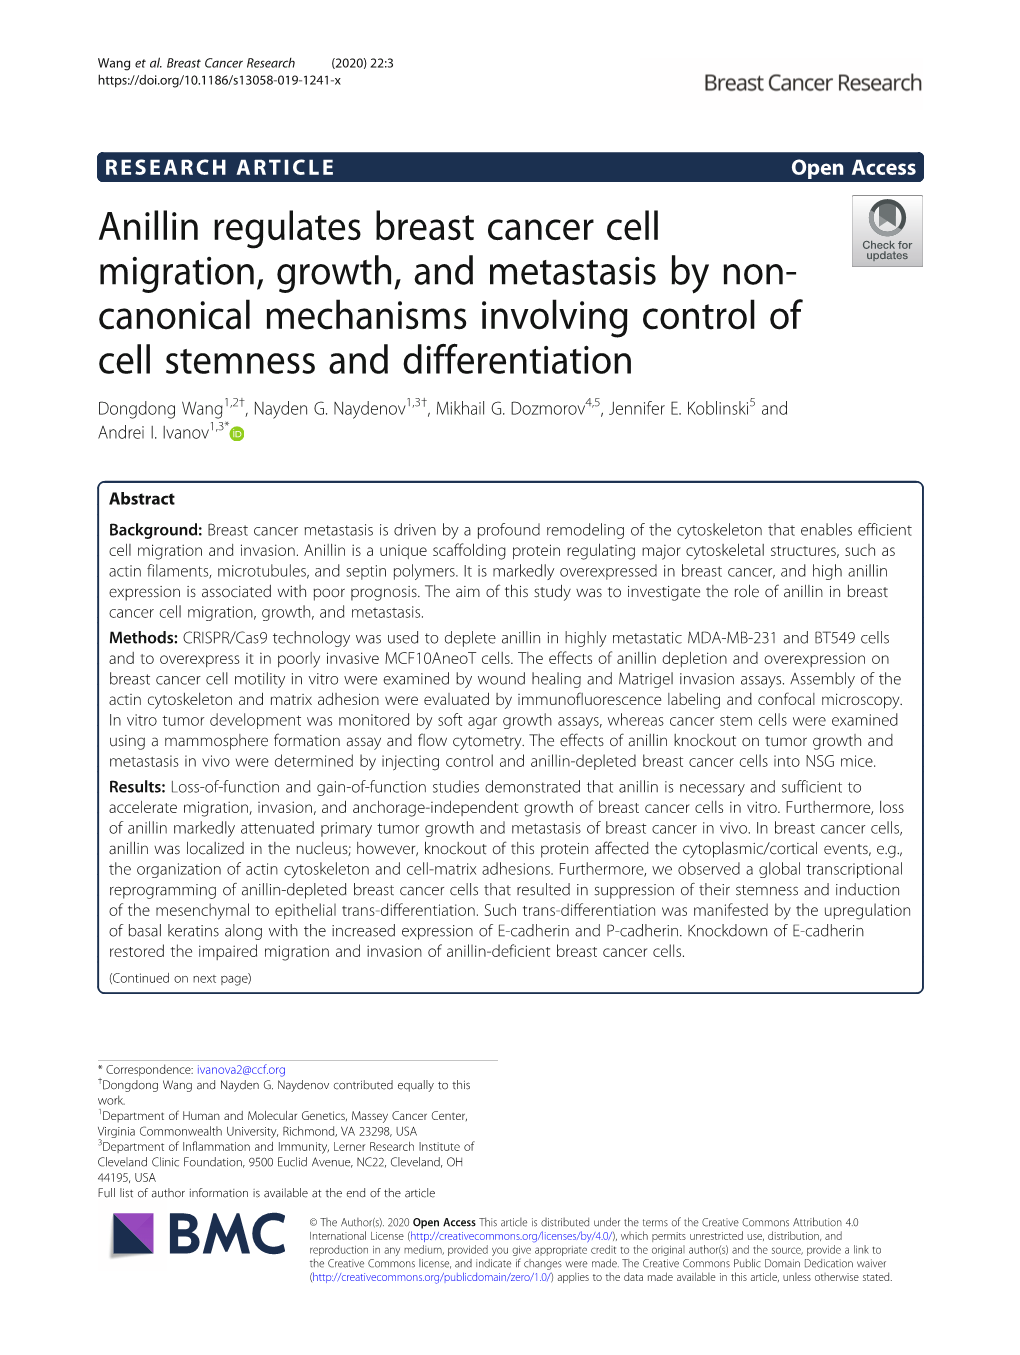 Anillin Regulates Breast Cancer Cell Migration, Growth, and Metastasis